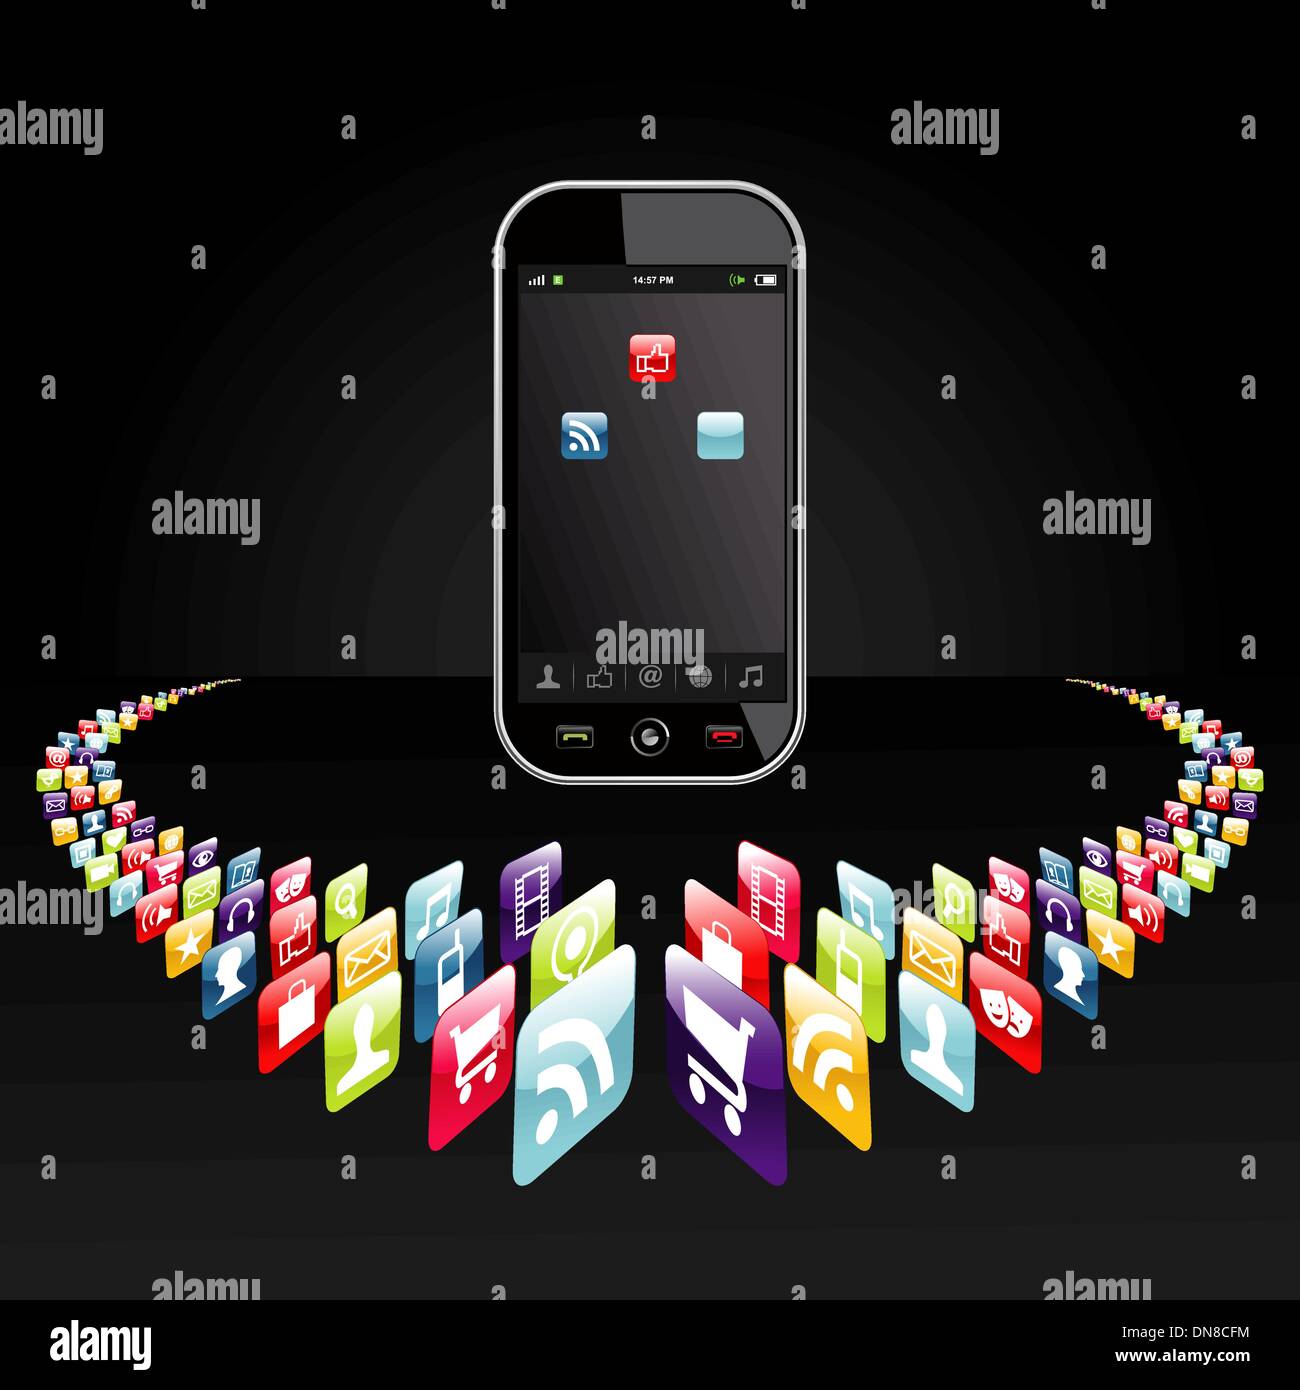 Smartphone apps icons presentation Stock Vector